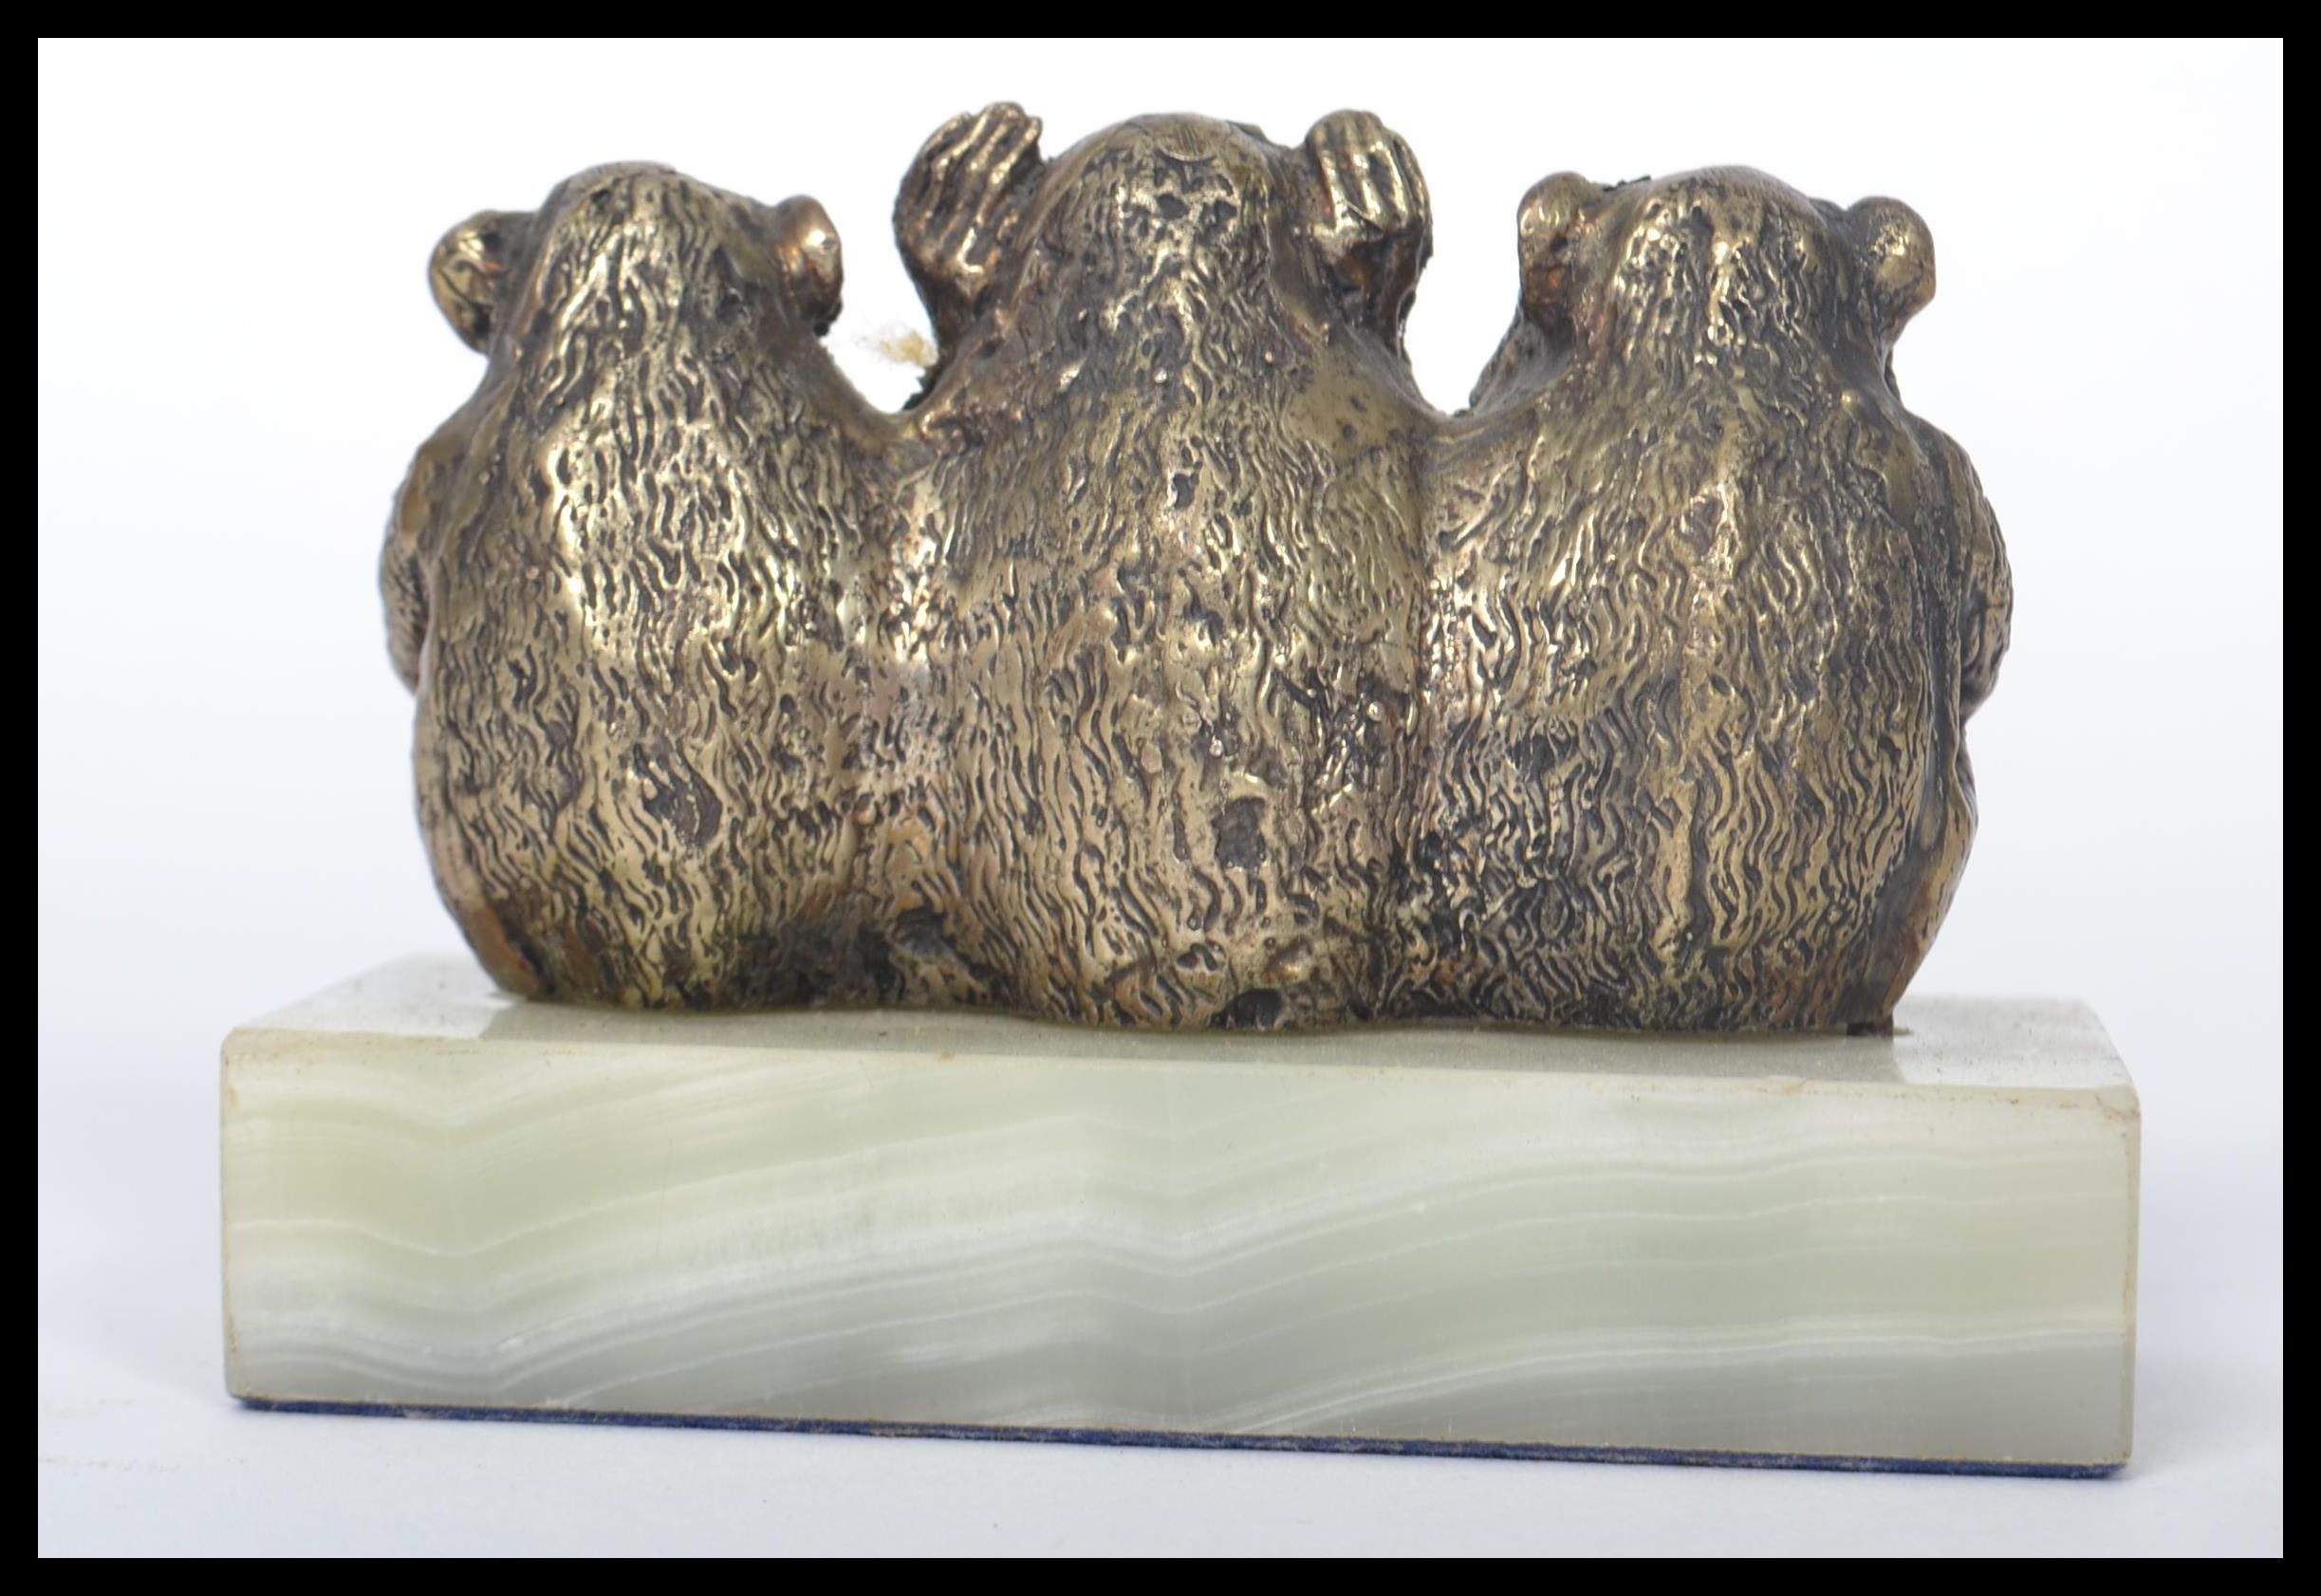 A vintage wise monkey 'see no evil, hear no evil, speak no evil' silver plated figurine group raised - Image 3 of 6